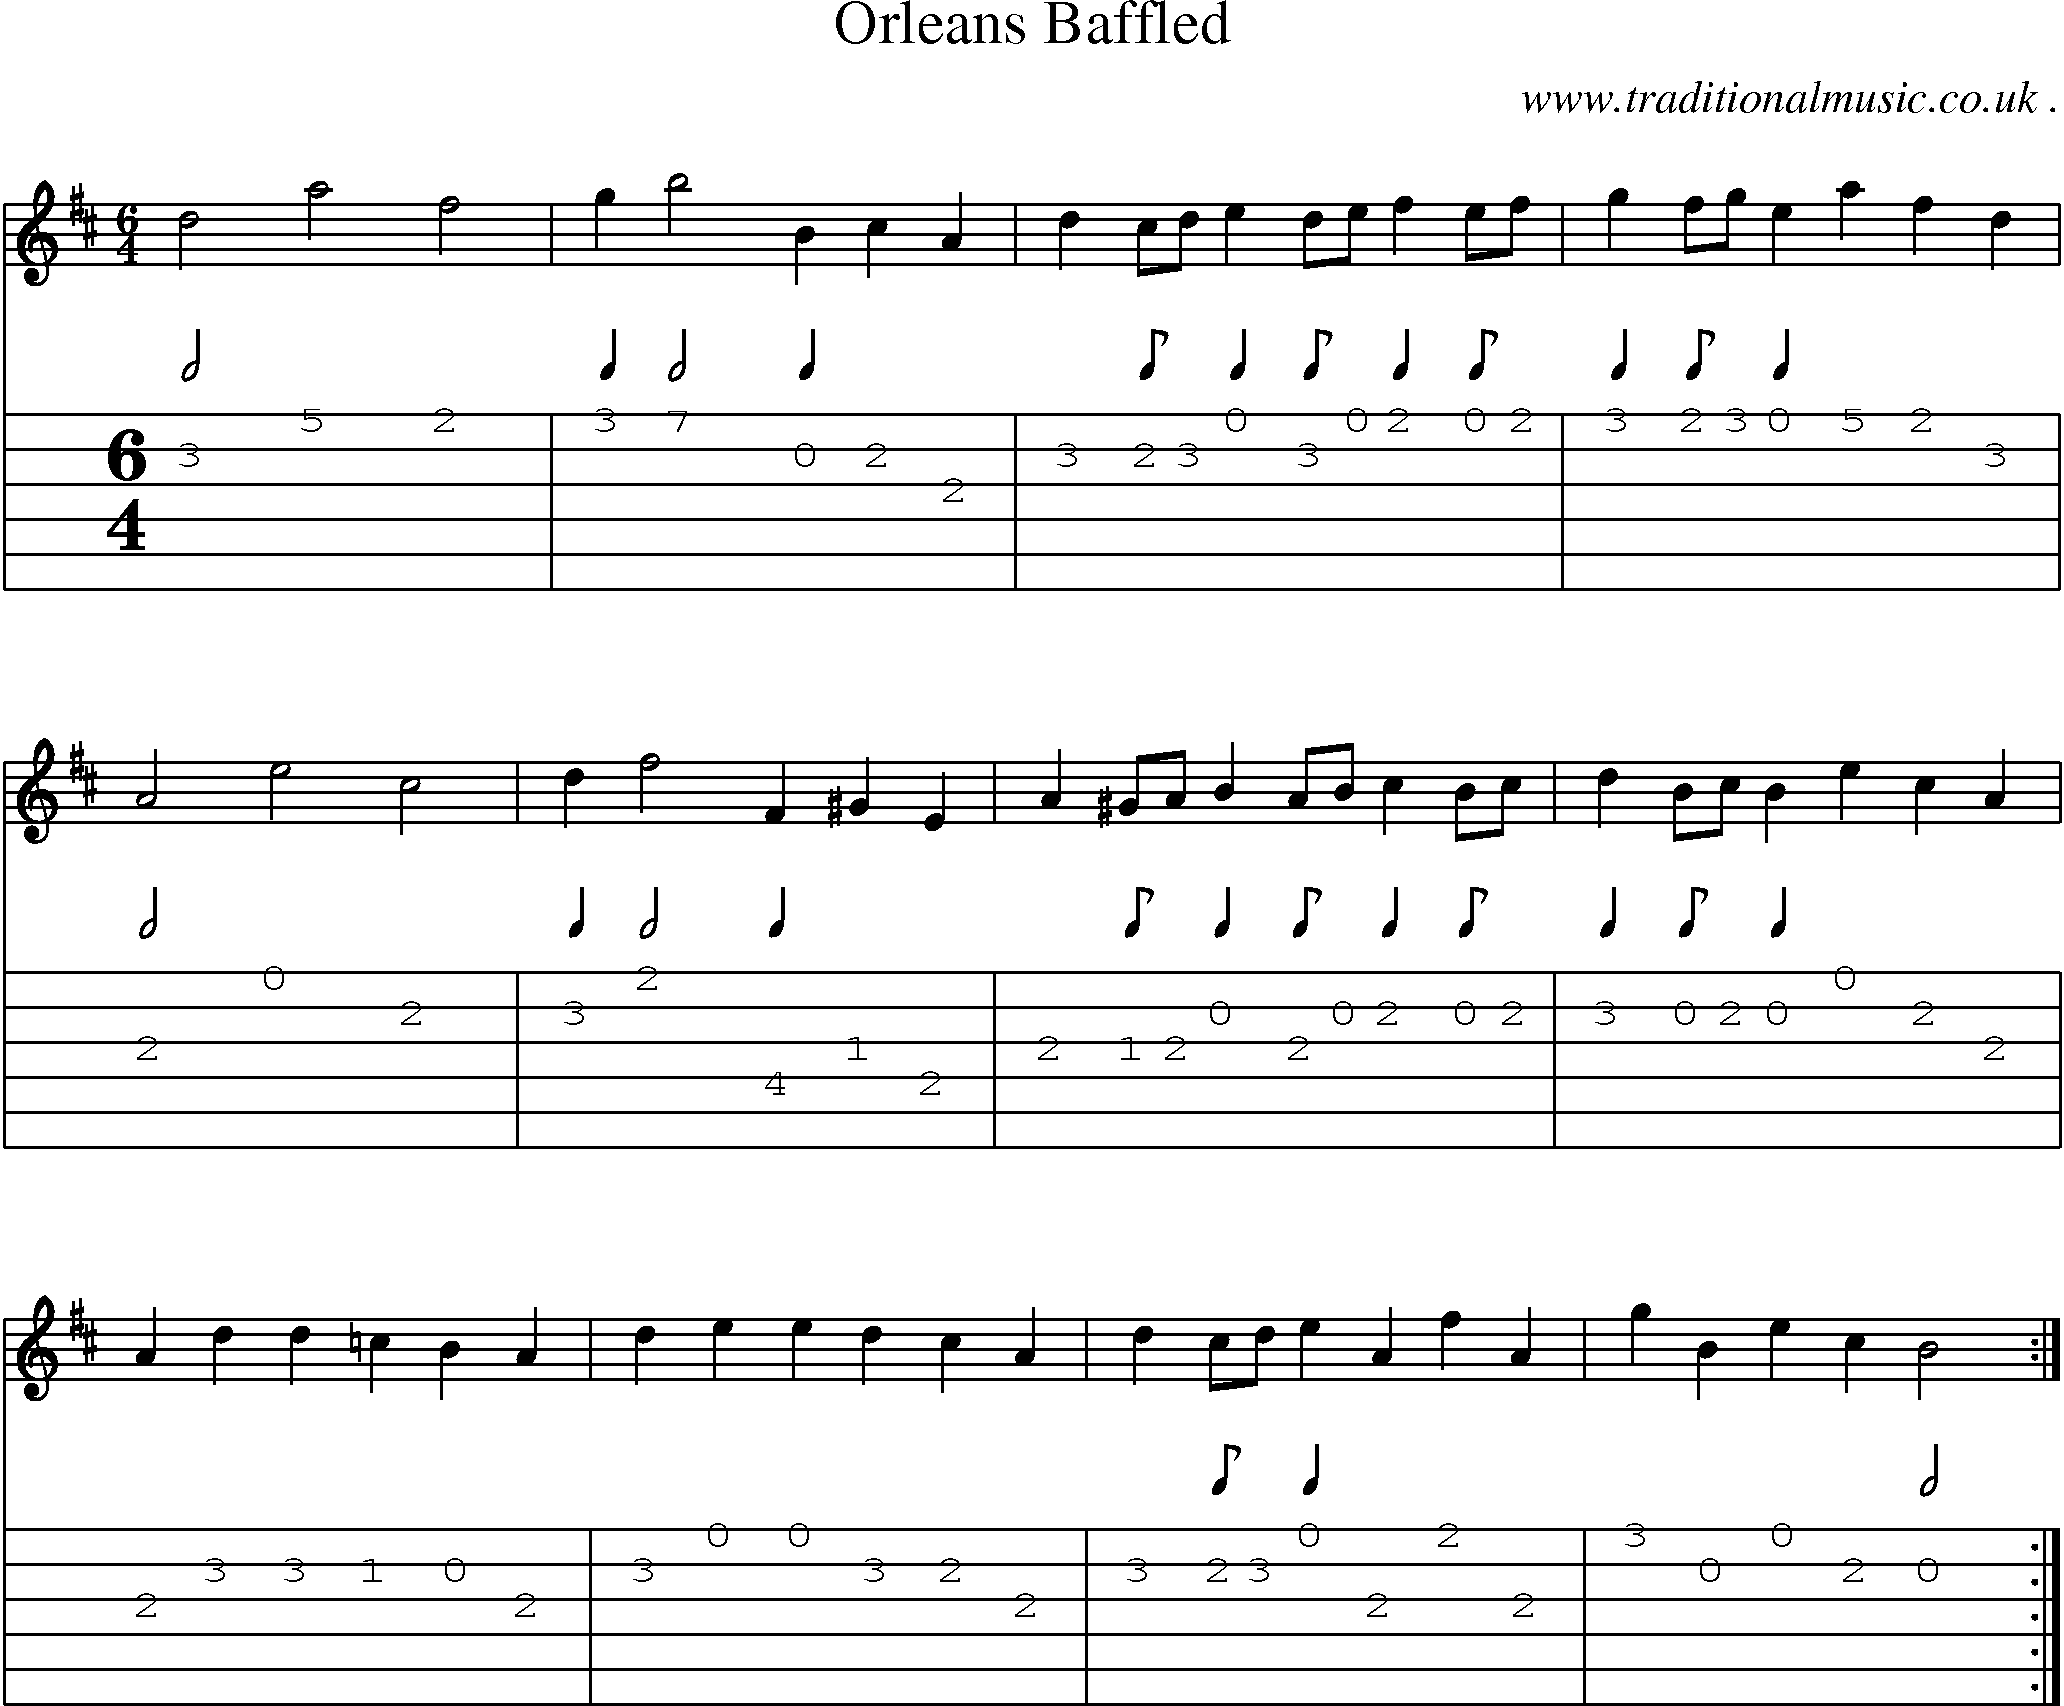 Sheet-Music and Guitar Tabs for Orleans Baffled